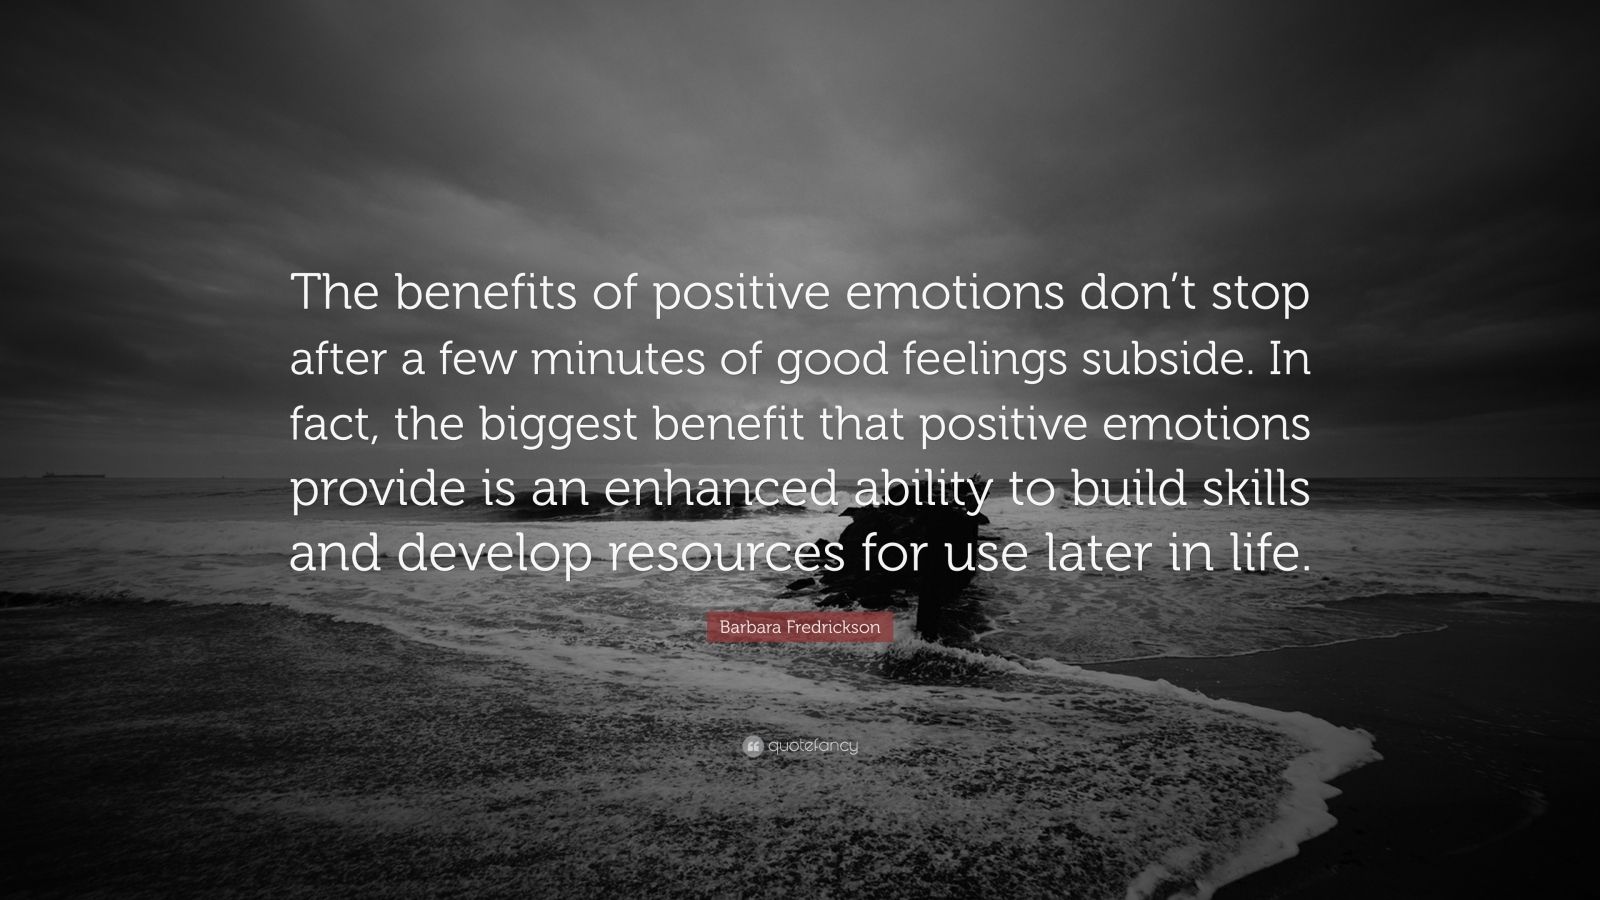 Barbara Fredrickson Quote: “The benefits of positive emotions don’t ...